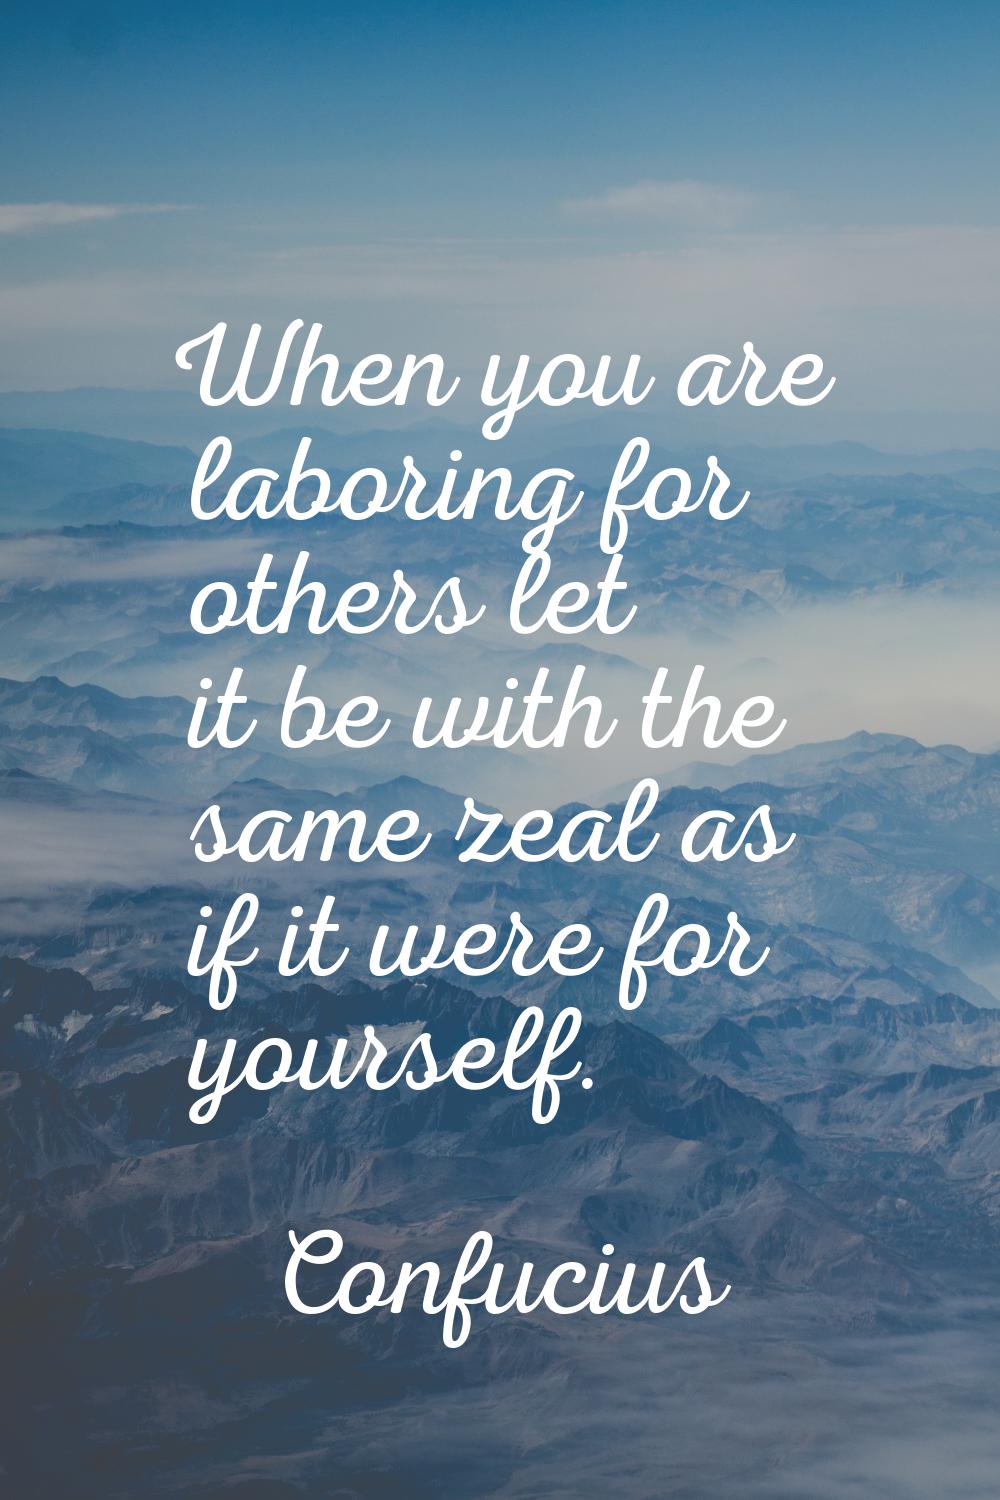 When you are laboring for others let it be with the same zeal as if it were for yourself.